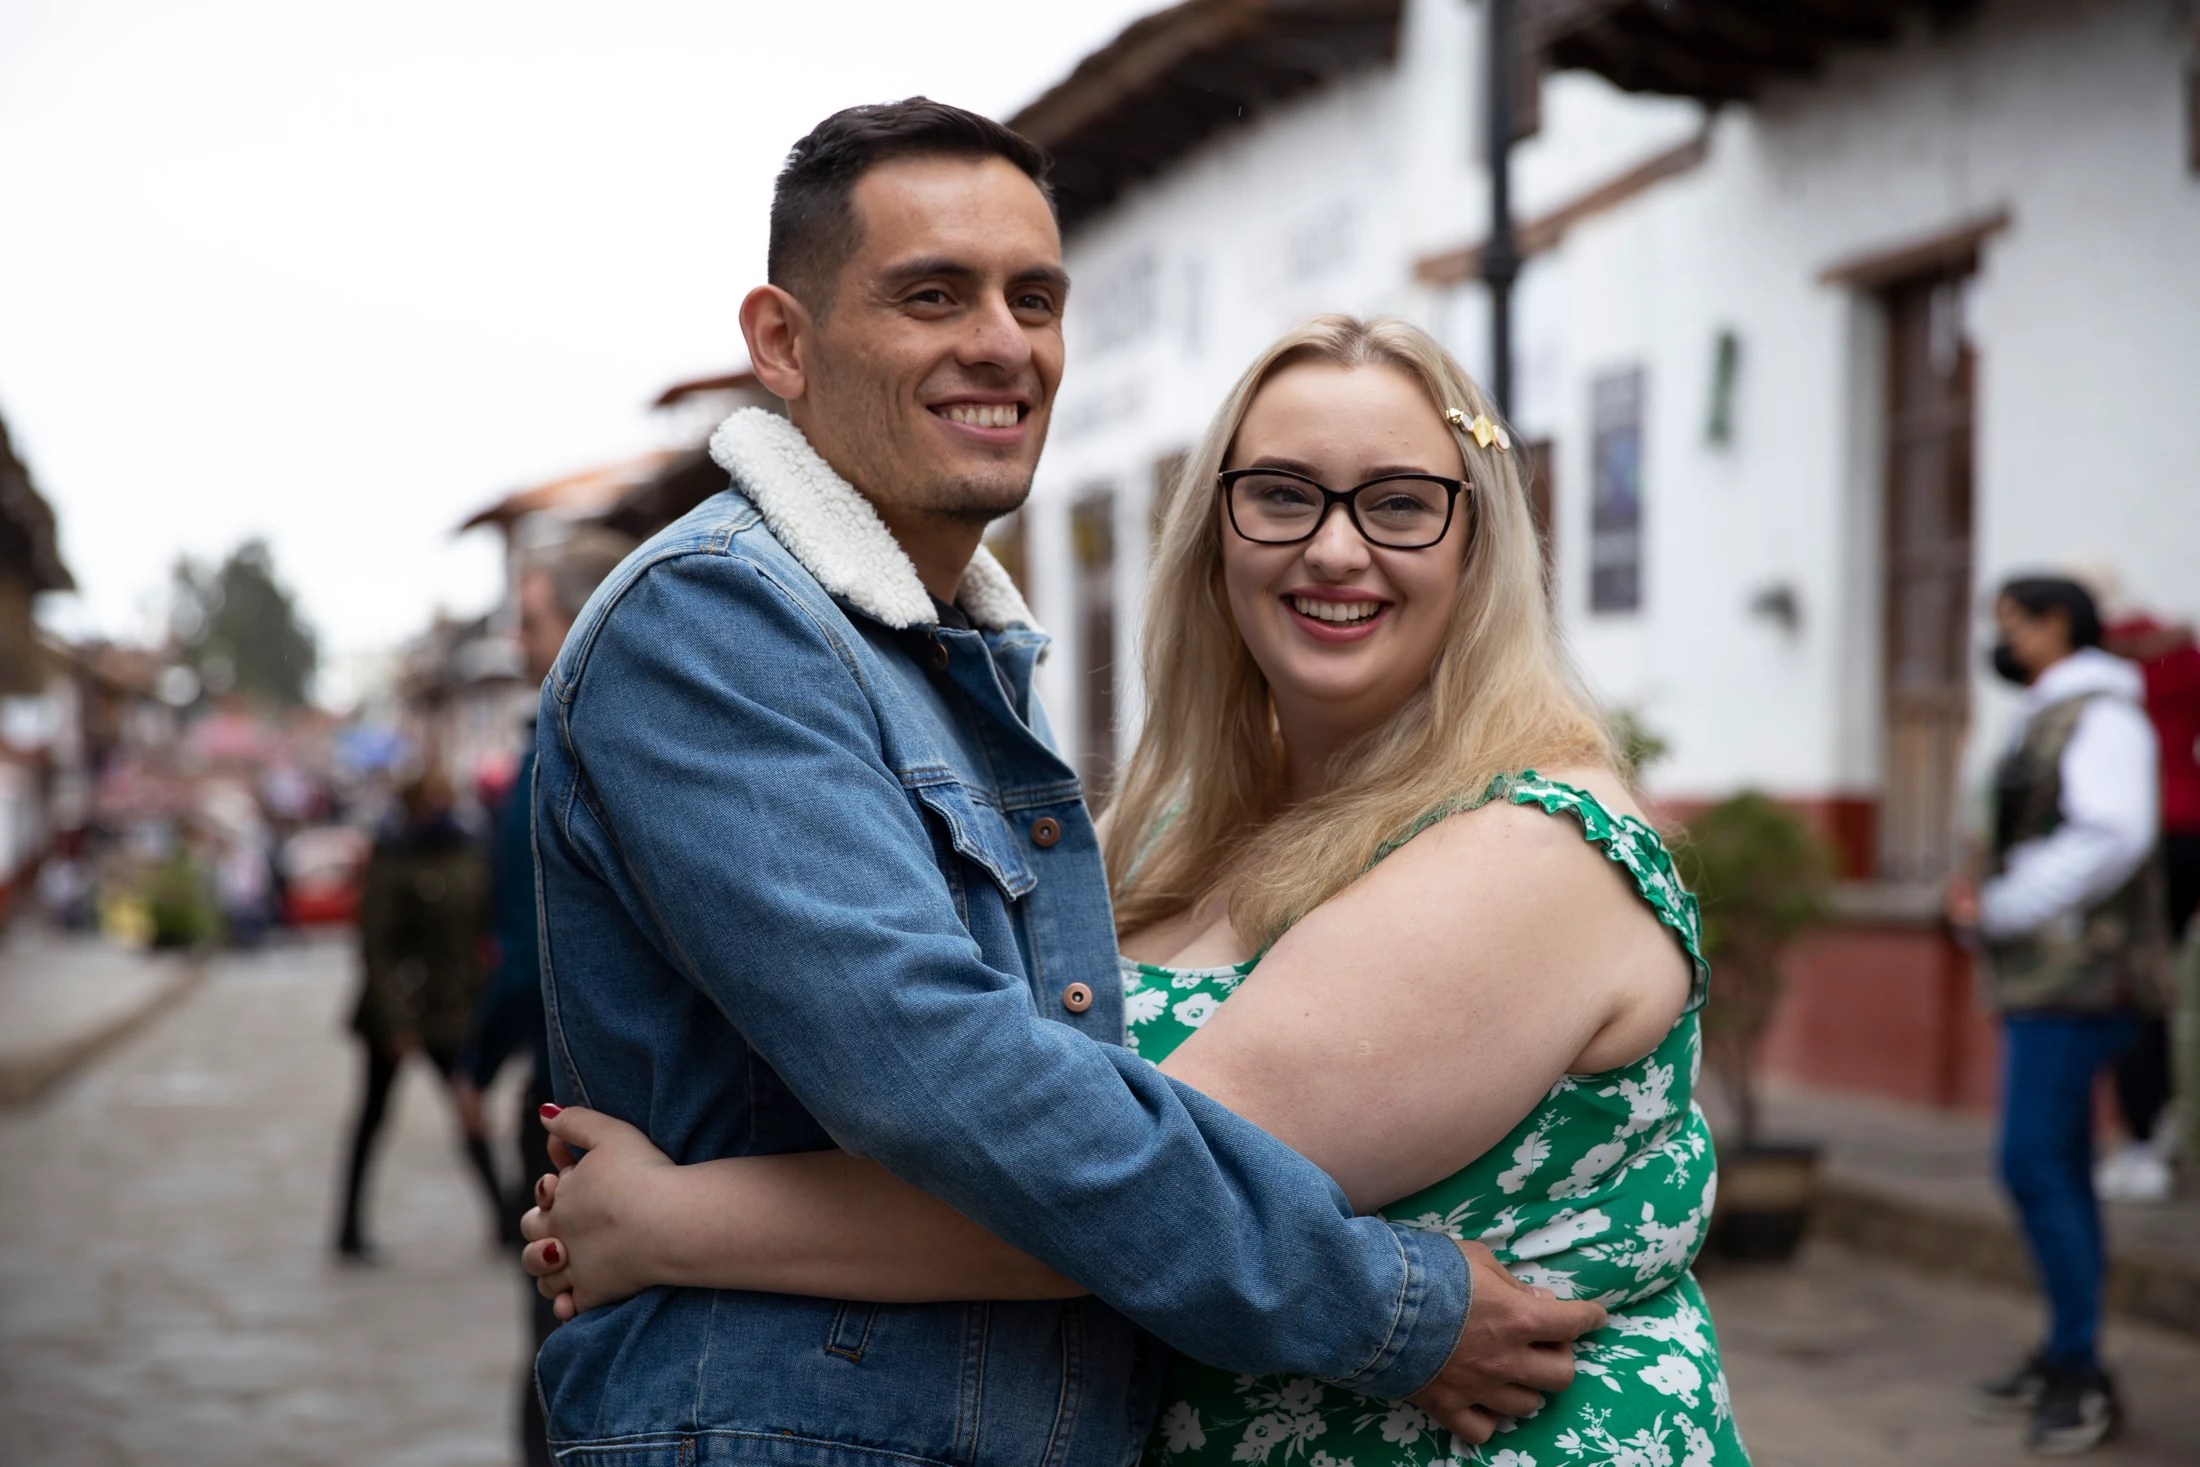 Kadie and Alejandro together in Mexico on '90 Day Fiancé UK' on discovery+.